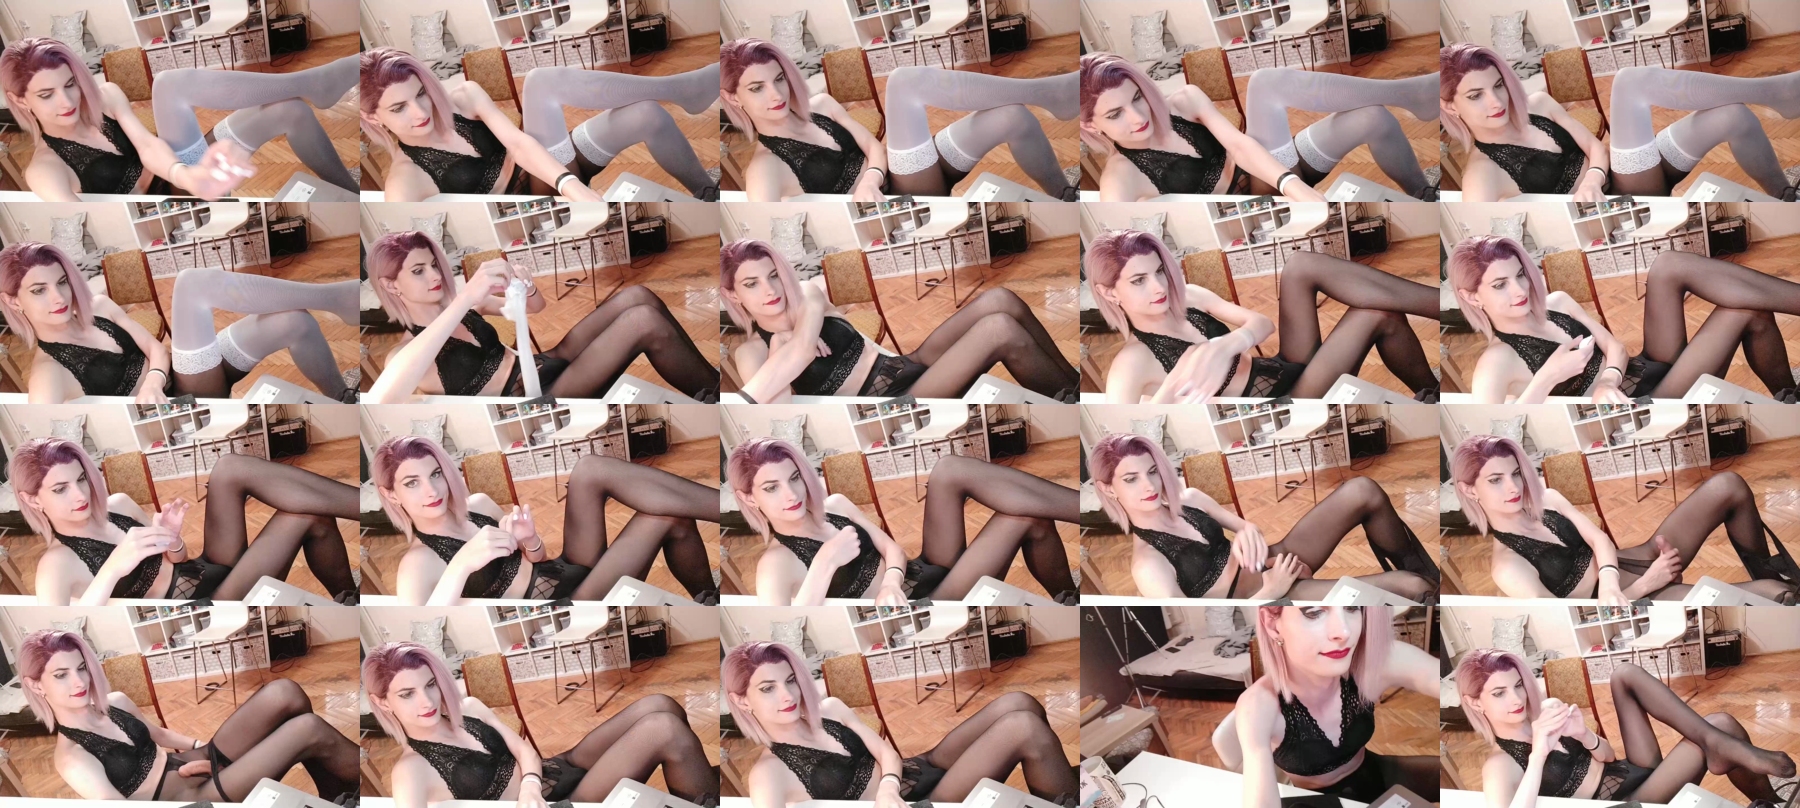 Pantyhose_Fetish Download CAM SHOW @ Chaturbate 09-07-2021